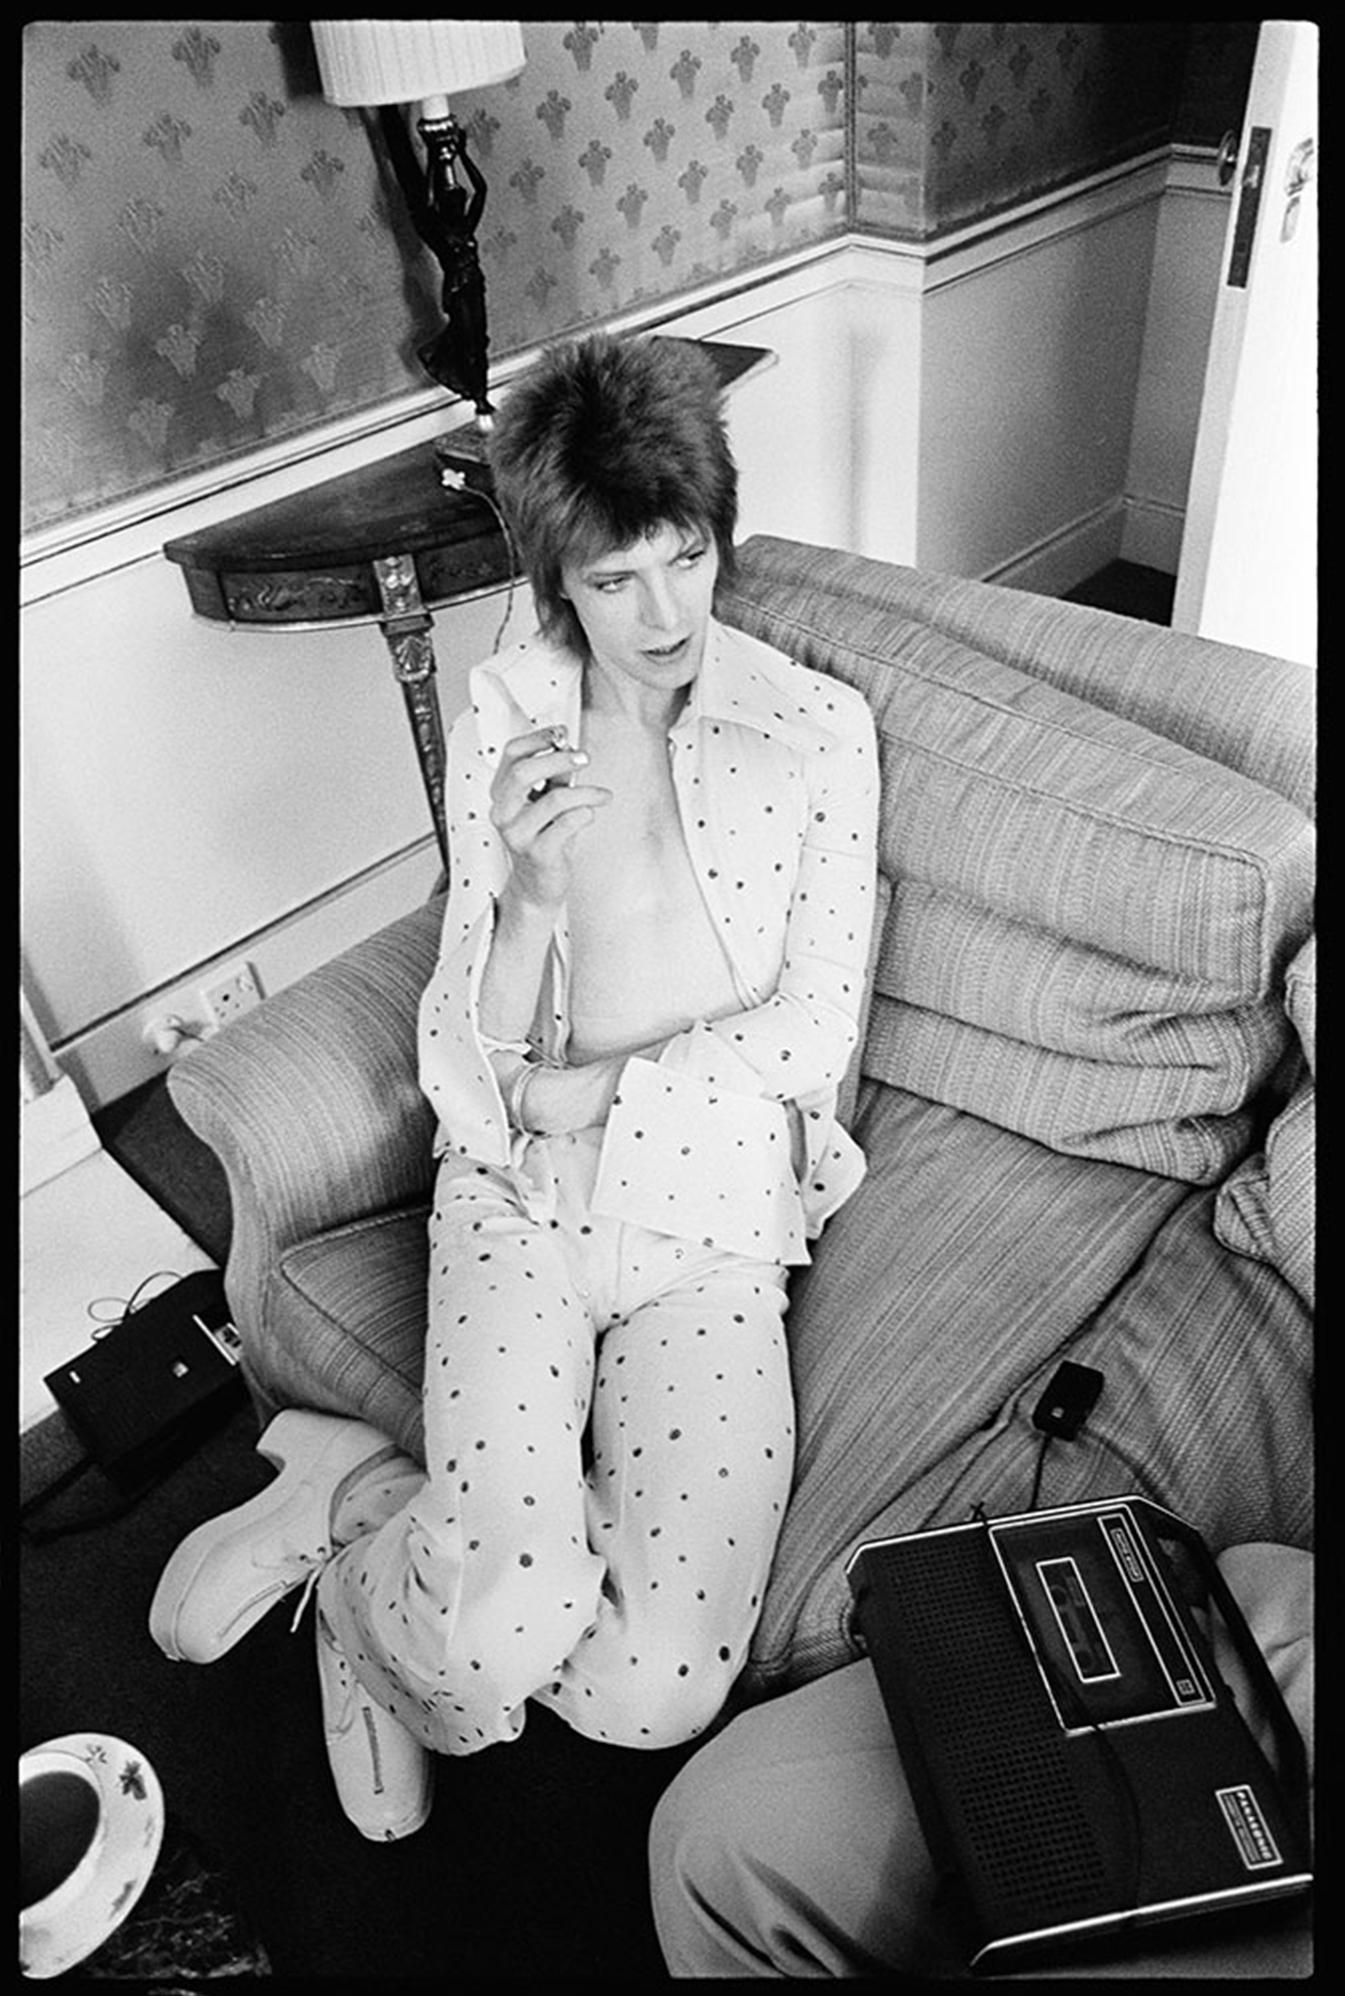 Alec Byrne Black and White Photograph - David Bowie at The Dorchester Hotel 1972